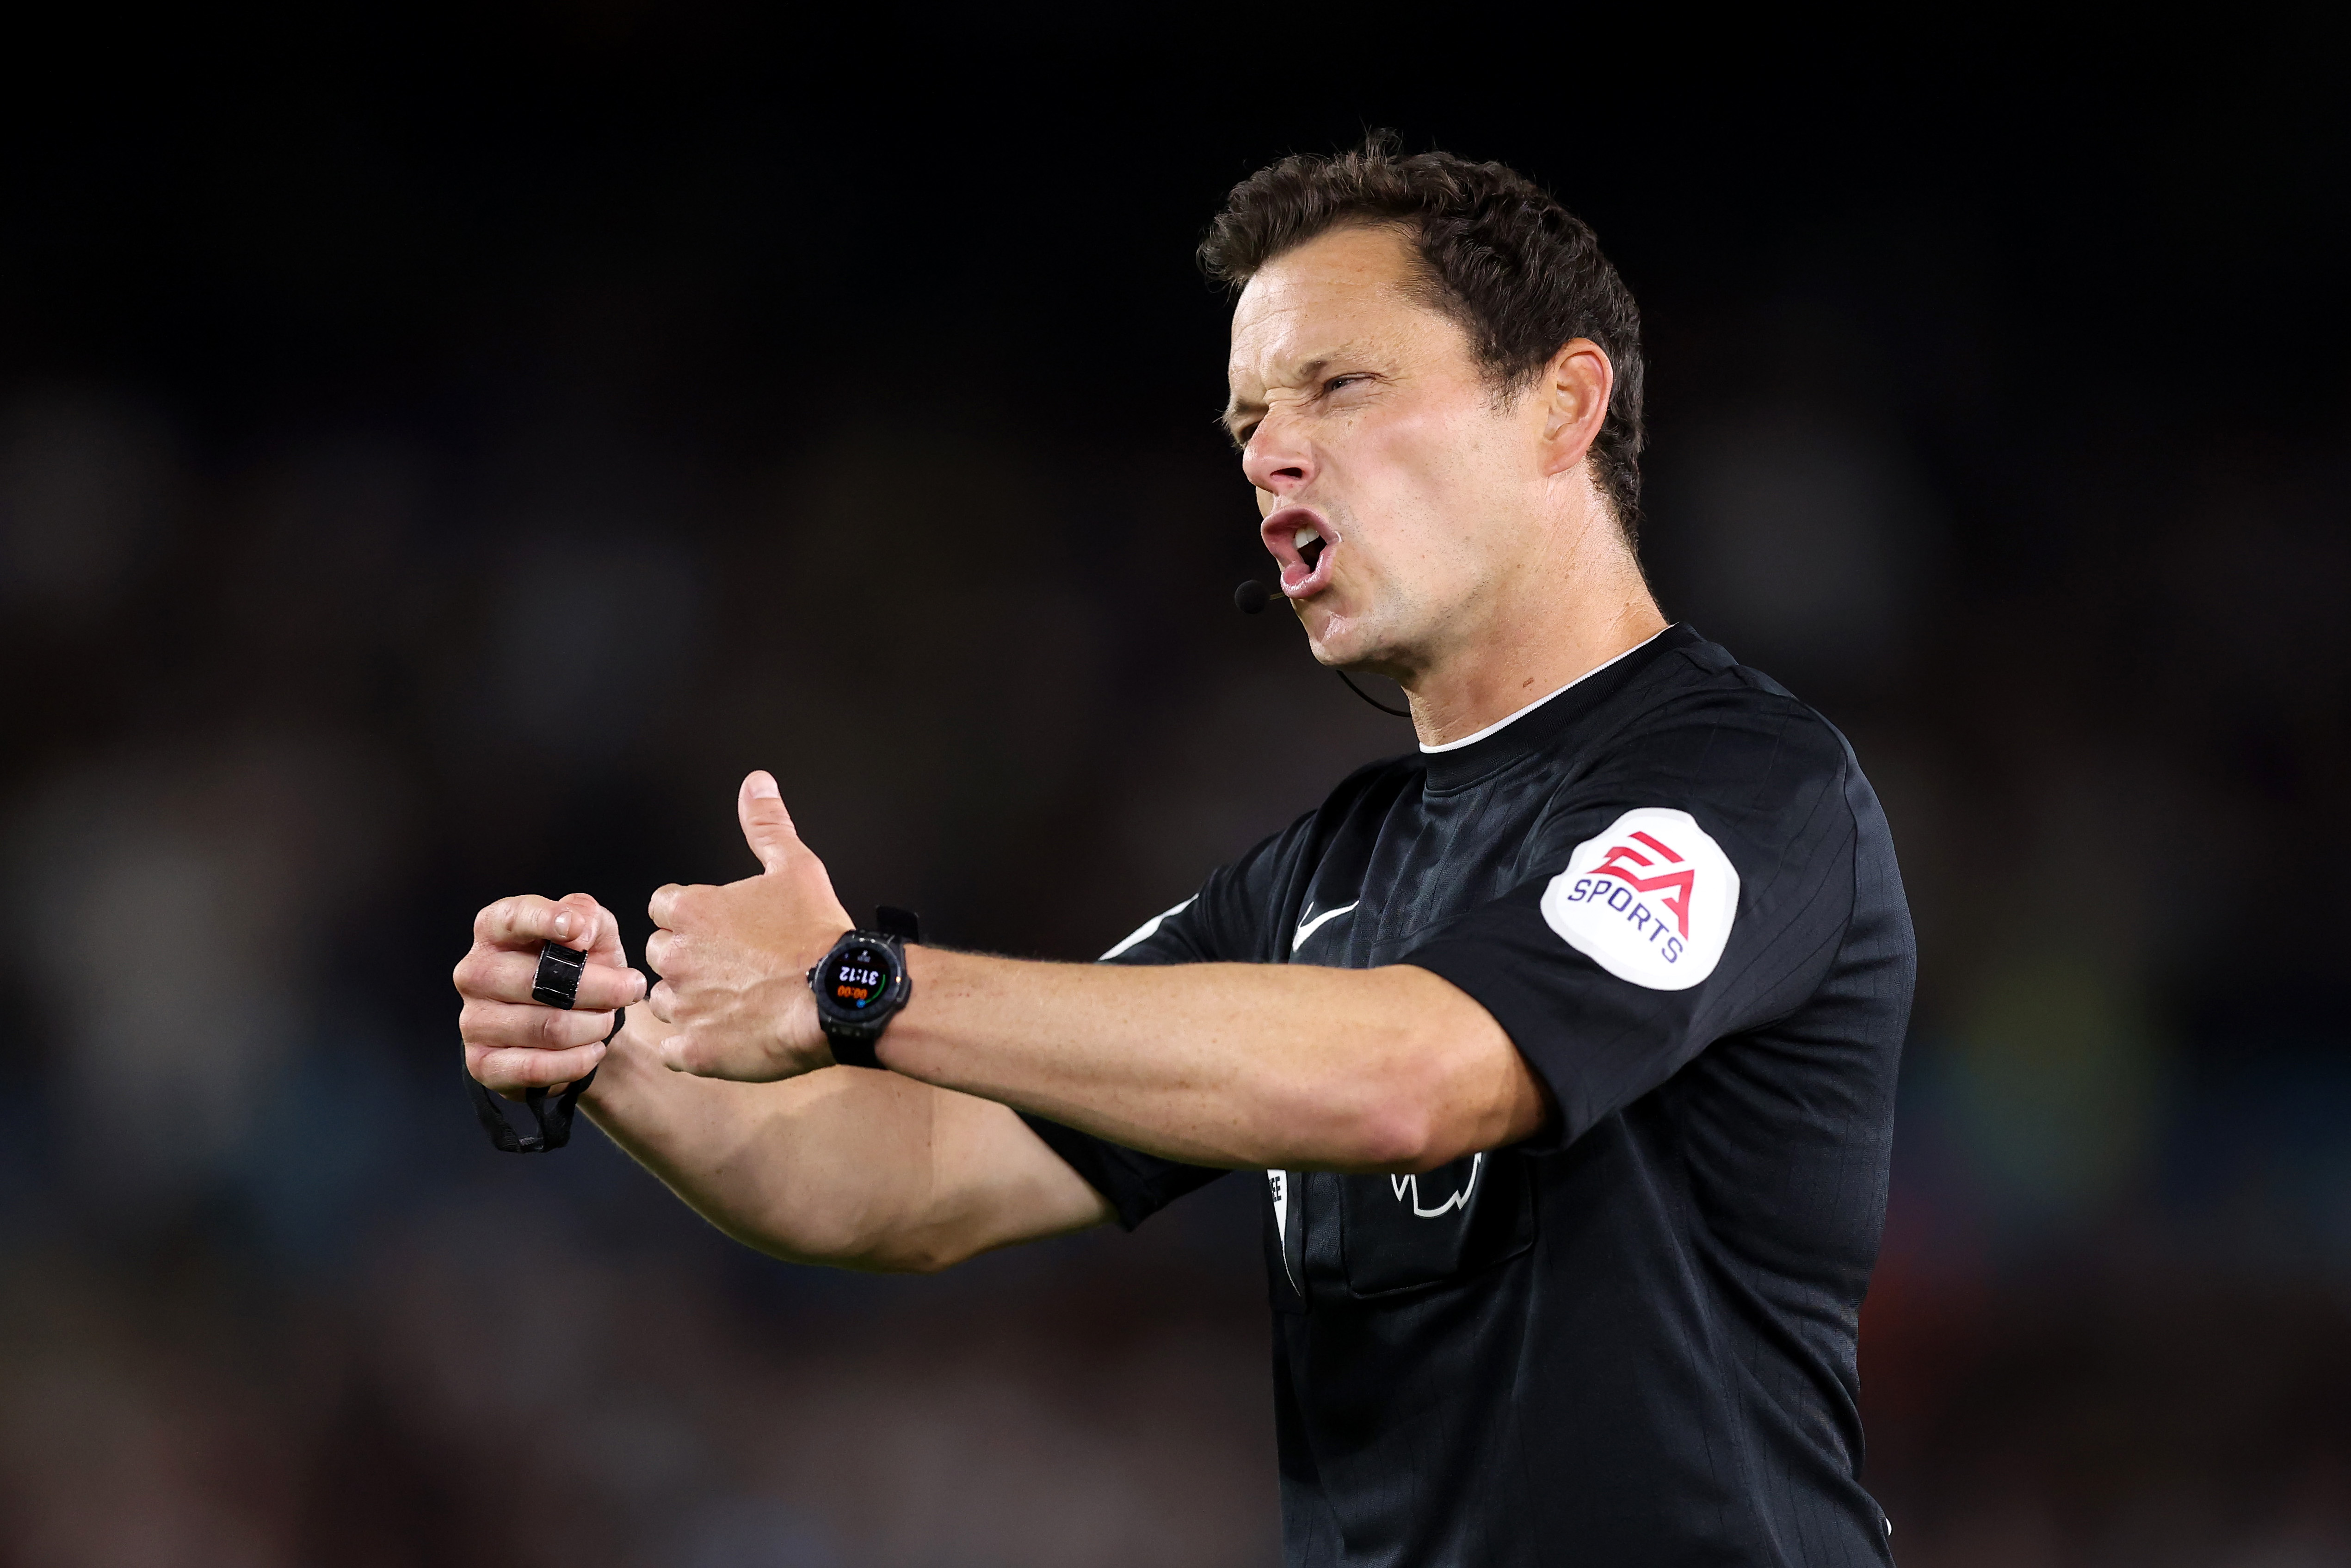 VAR official from Arsenal defeat keeps role for Liverpool v Man City – Reds will be in uproar